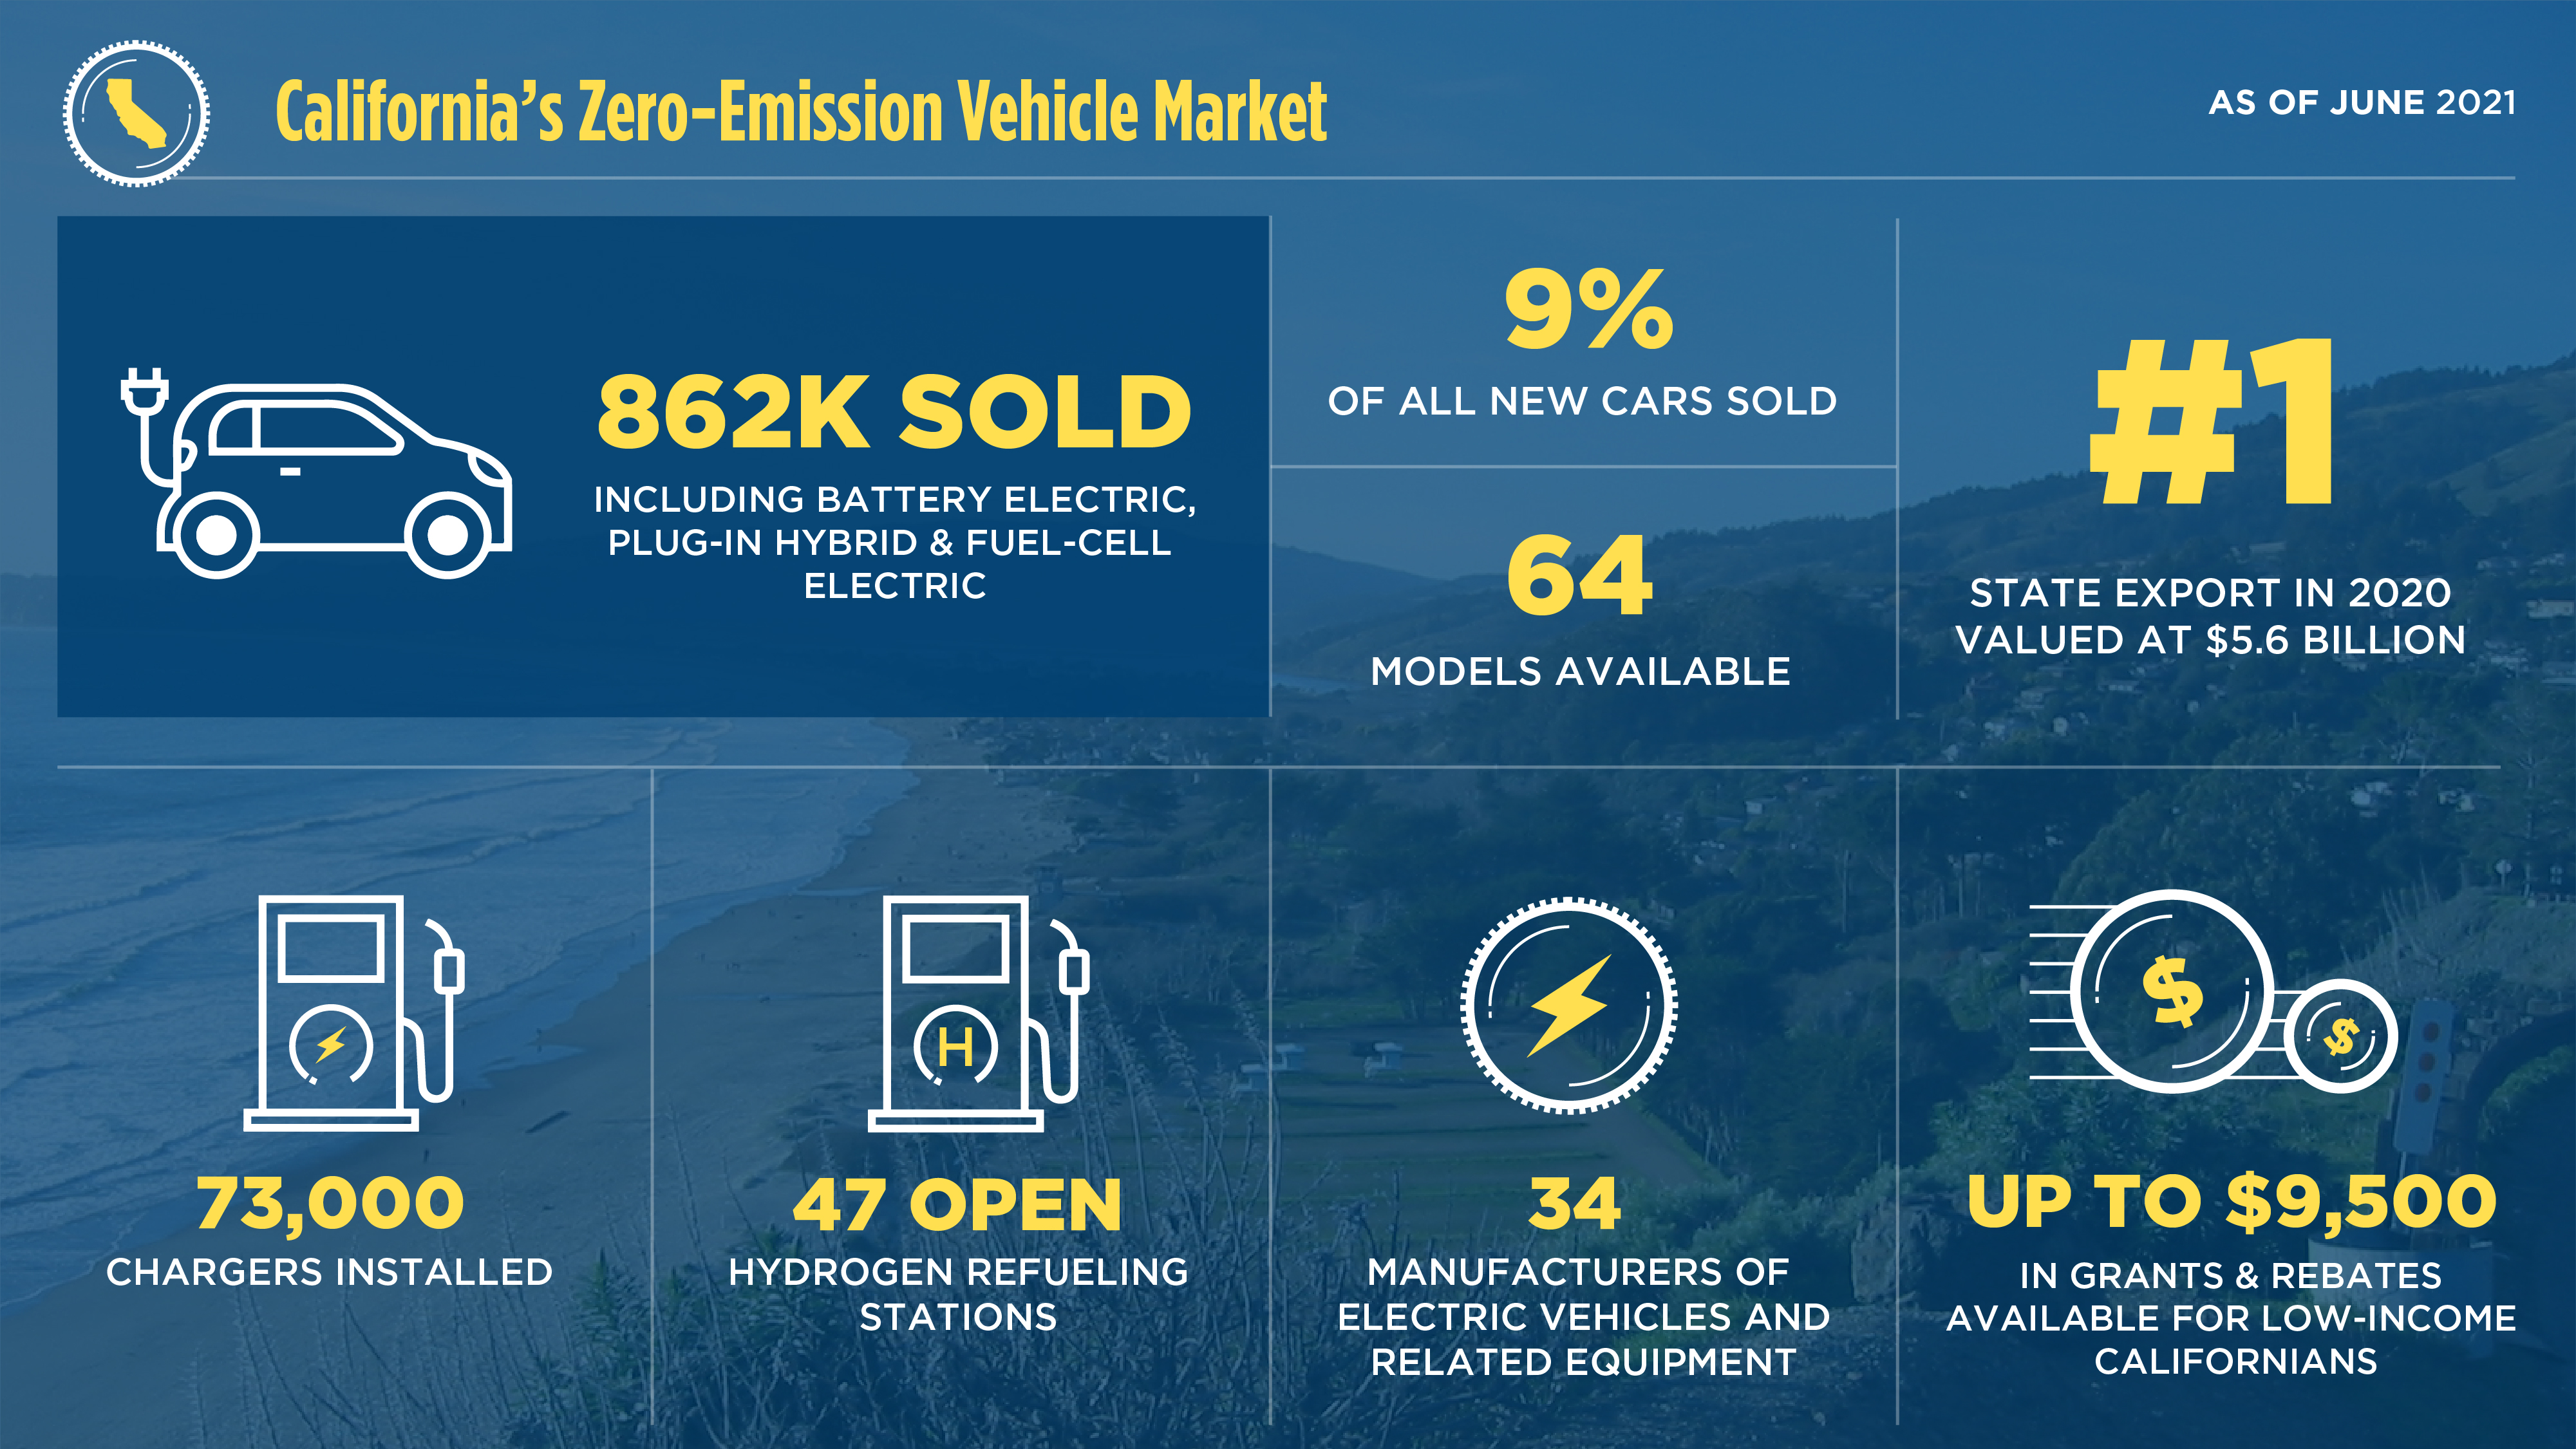 Fast Facts About California’s Zero-Emission Vehicle Market. 862,000 ZEVs sold to date including battery electric, plug-in hybrid and fuel-cell electric. 9% of all new cars sold in Q1 2021. #1 state export valued at $5.6 billion. 73,000 chargers installed. 47 open hydrogen stations. 34 manufacturers of electric vehicles and related equipment. Up to $9,500 in grants and rebates available for low-income Californians to purchase a zero-emission vehicle.